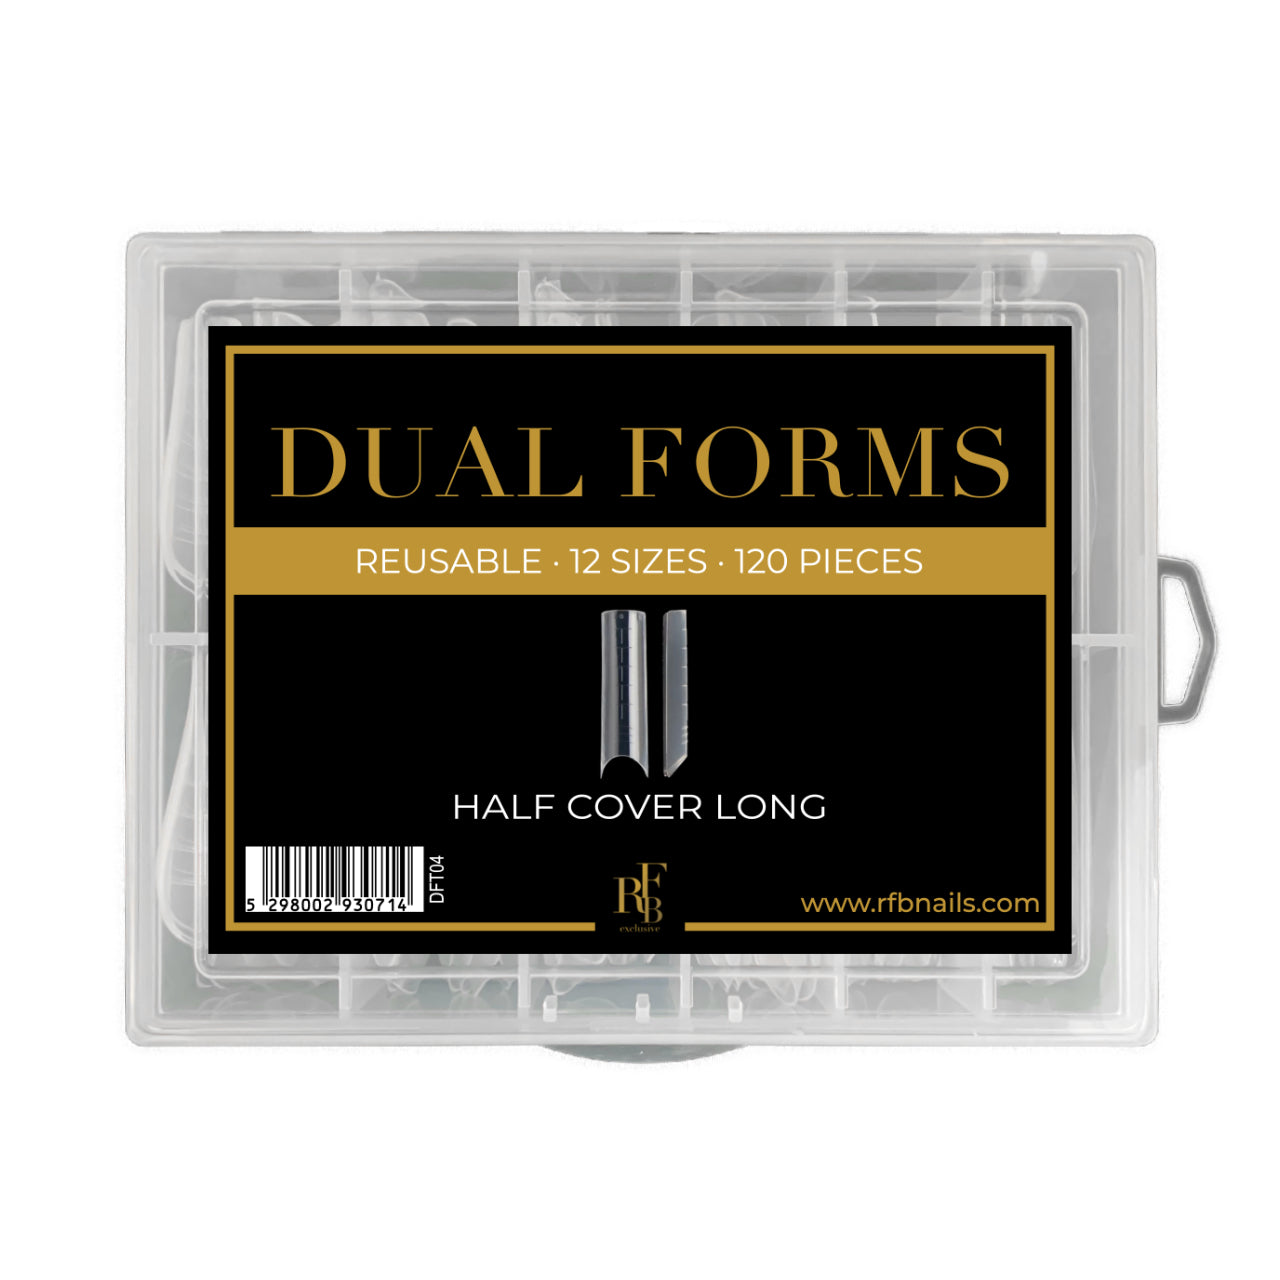 Dual Forms · Half Cover Long